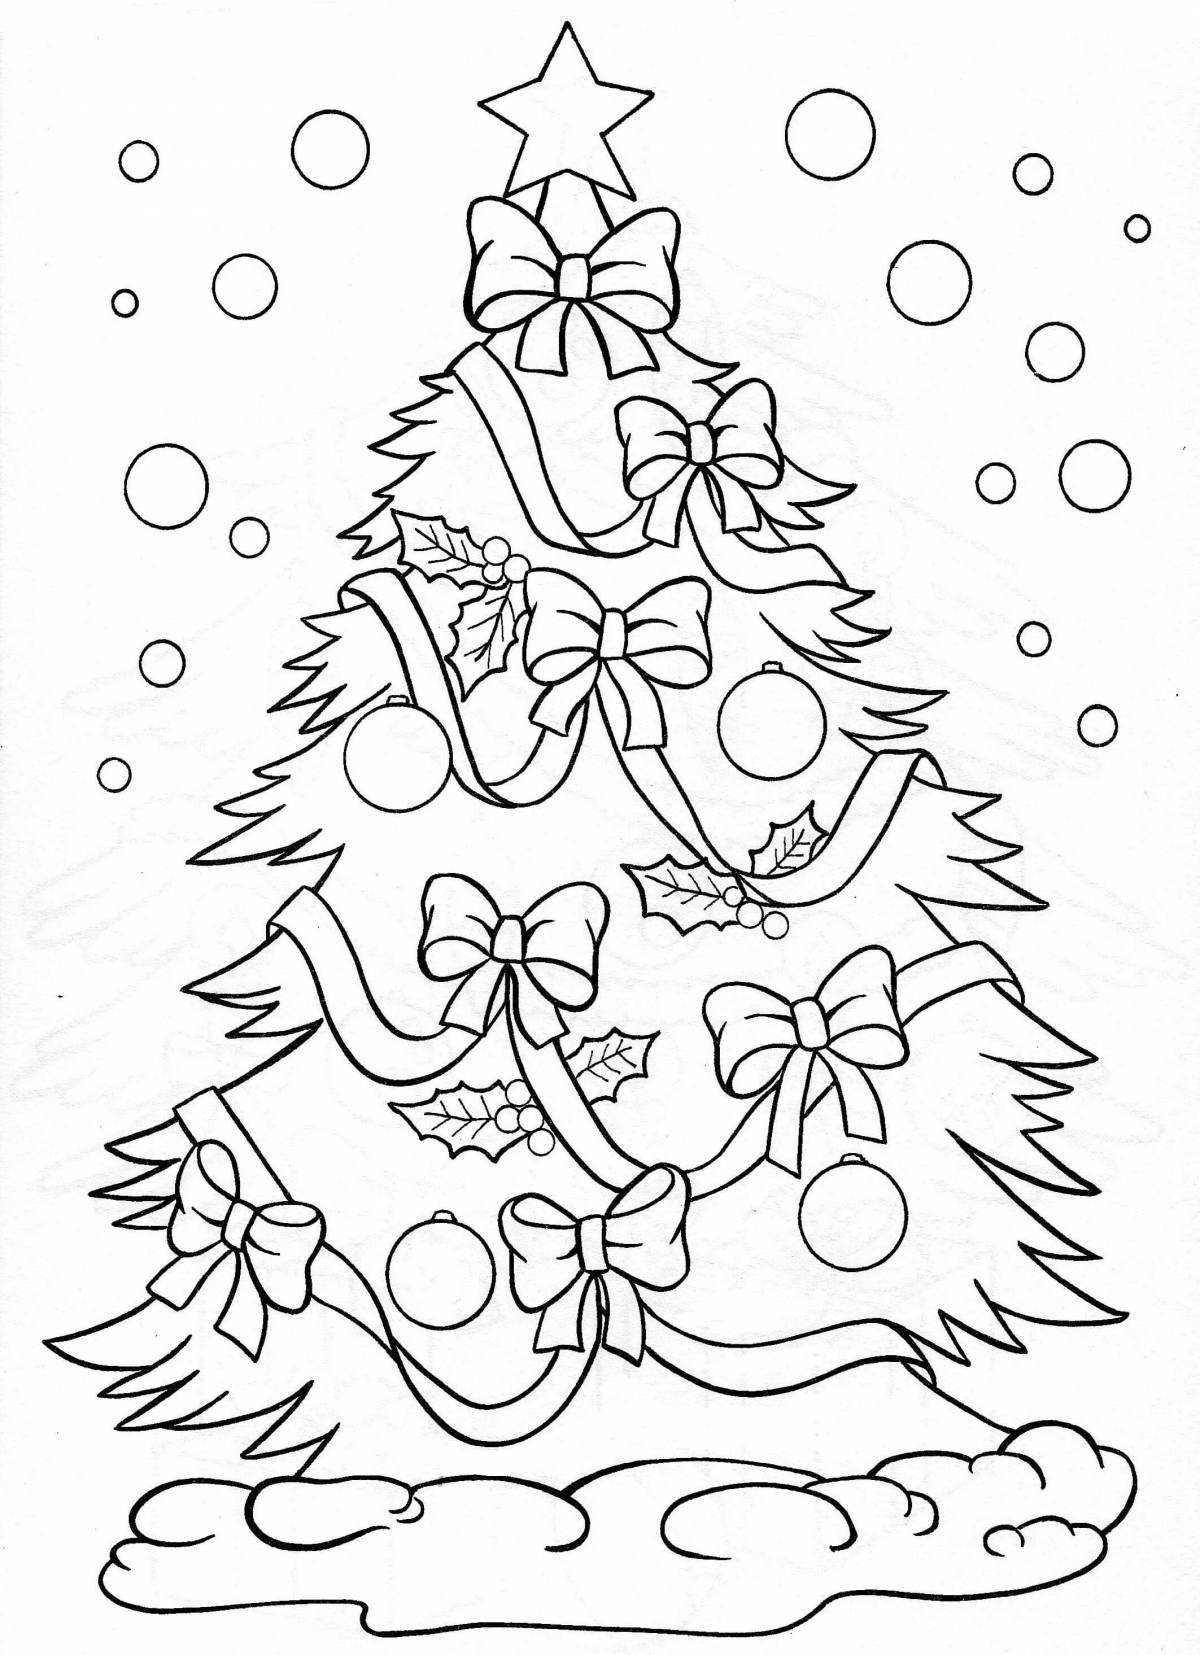 Adorable Christmas tree coloring book for children 5-6 years old